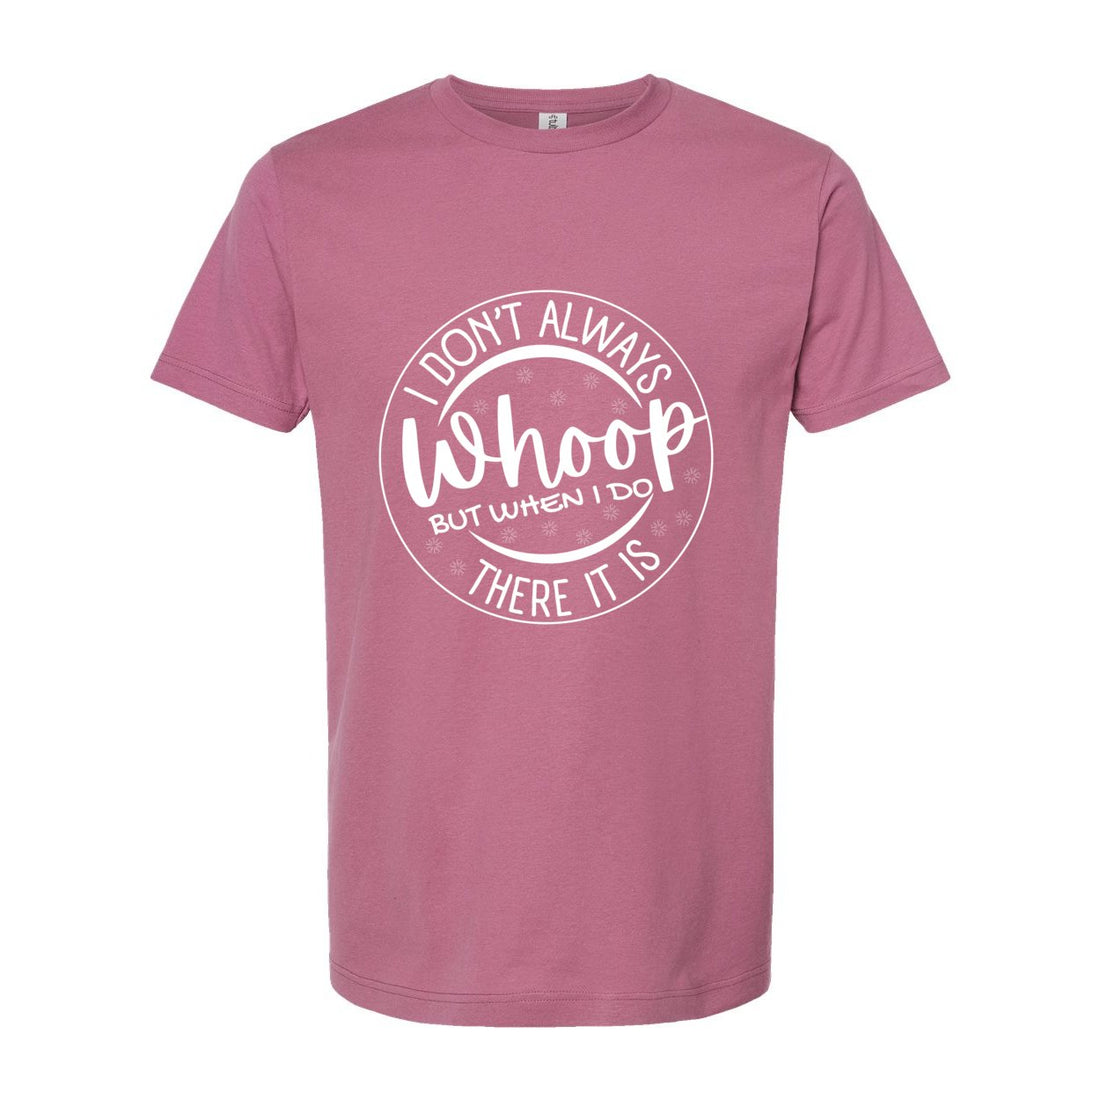 Whoop There It Is Tultex T-Shirt - T-Shirts - Positively Sassy - Whoop There It Is Tultex T-Shirt